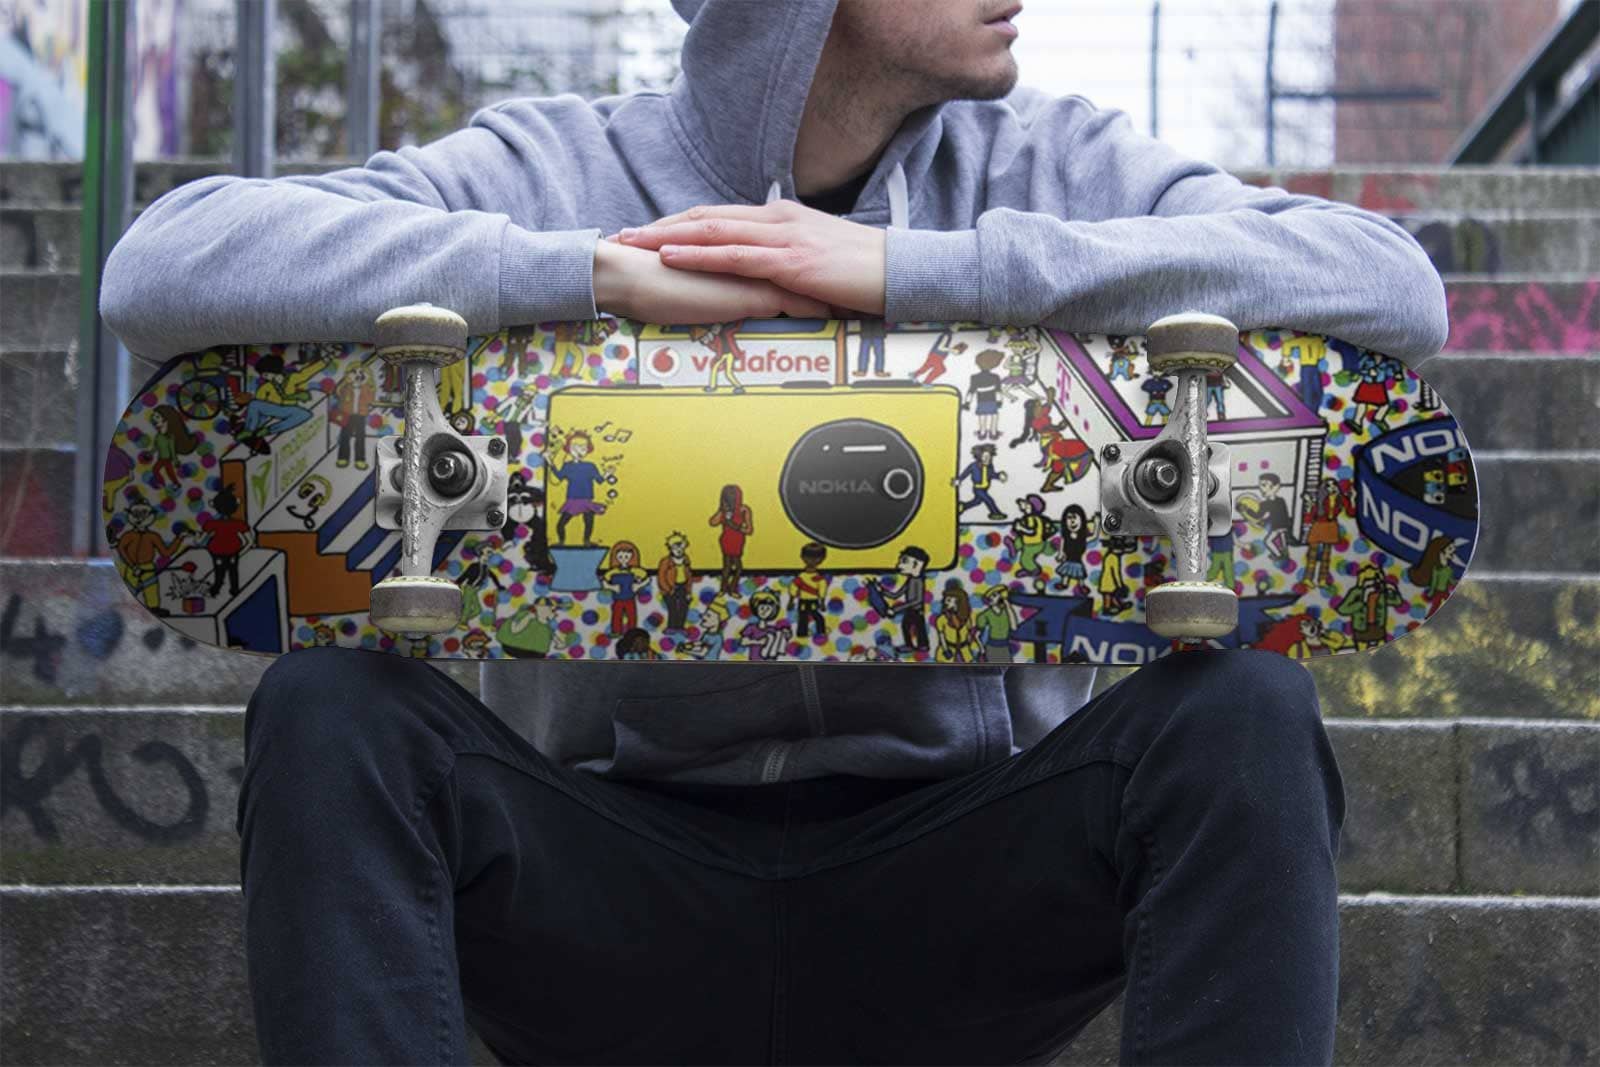 Nokia Postcard with illustrated characters printed on skateboard